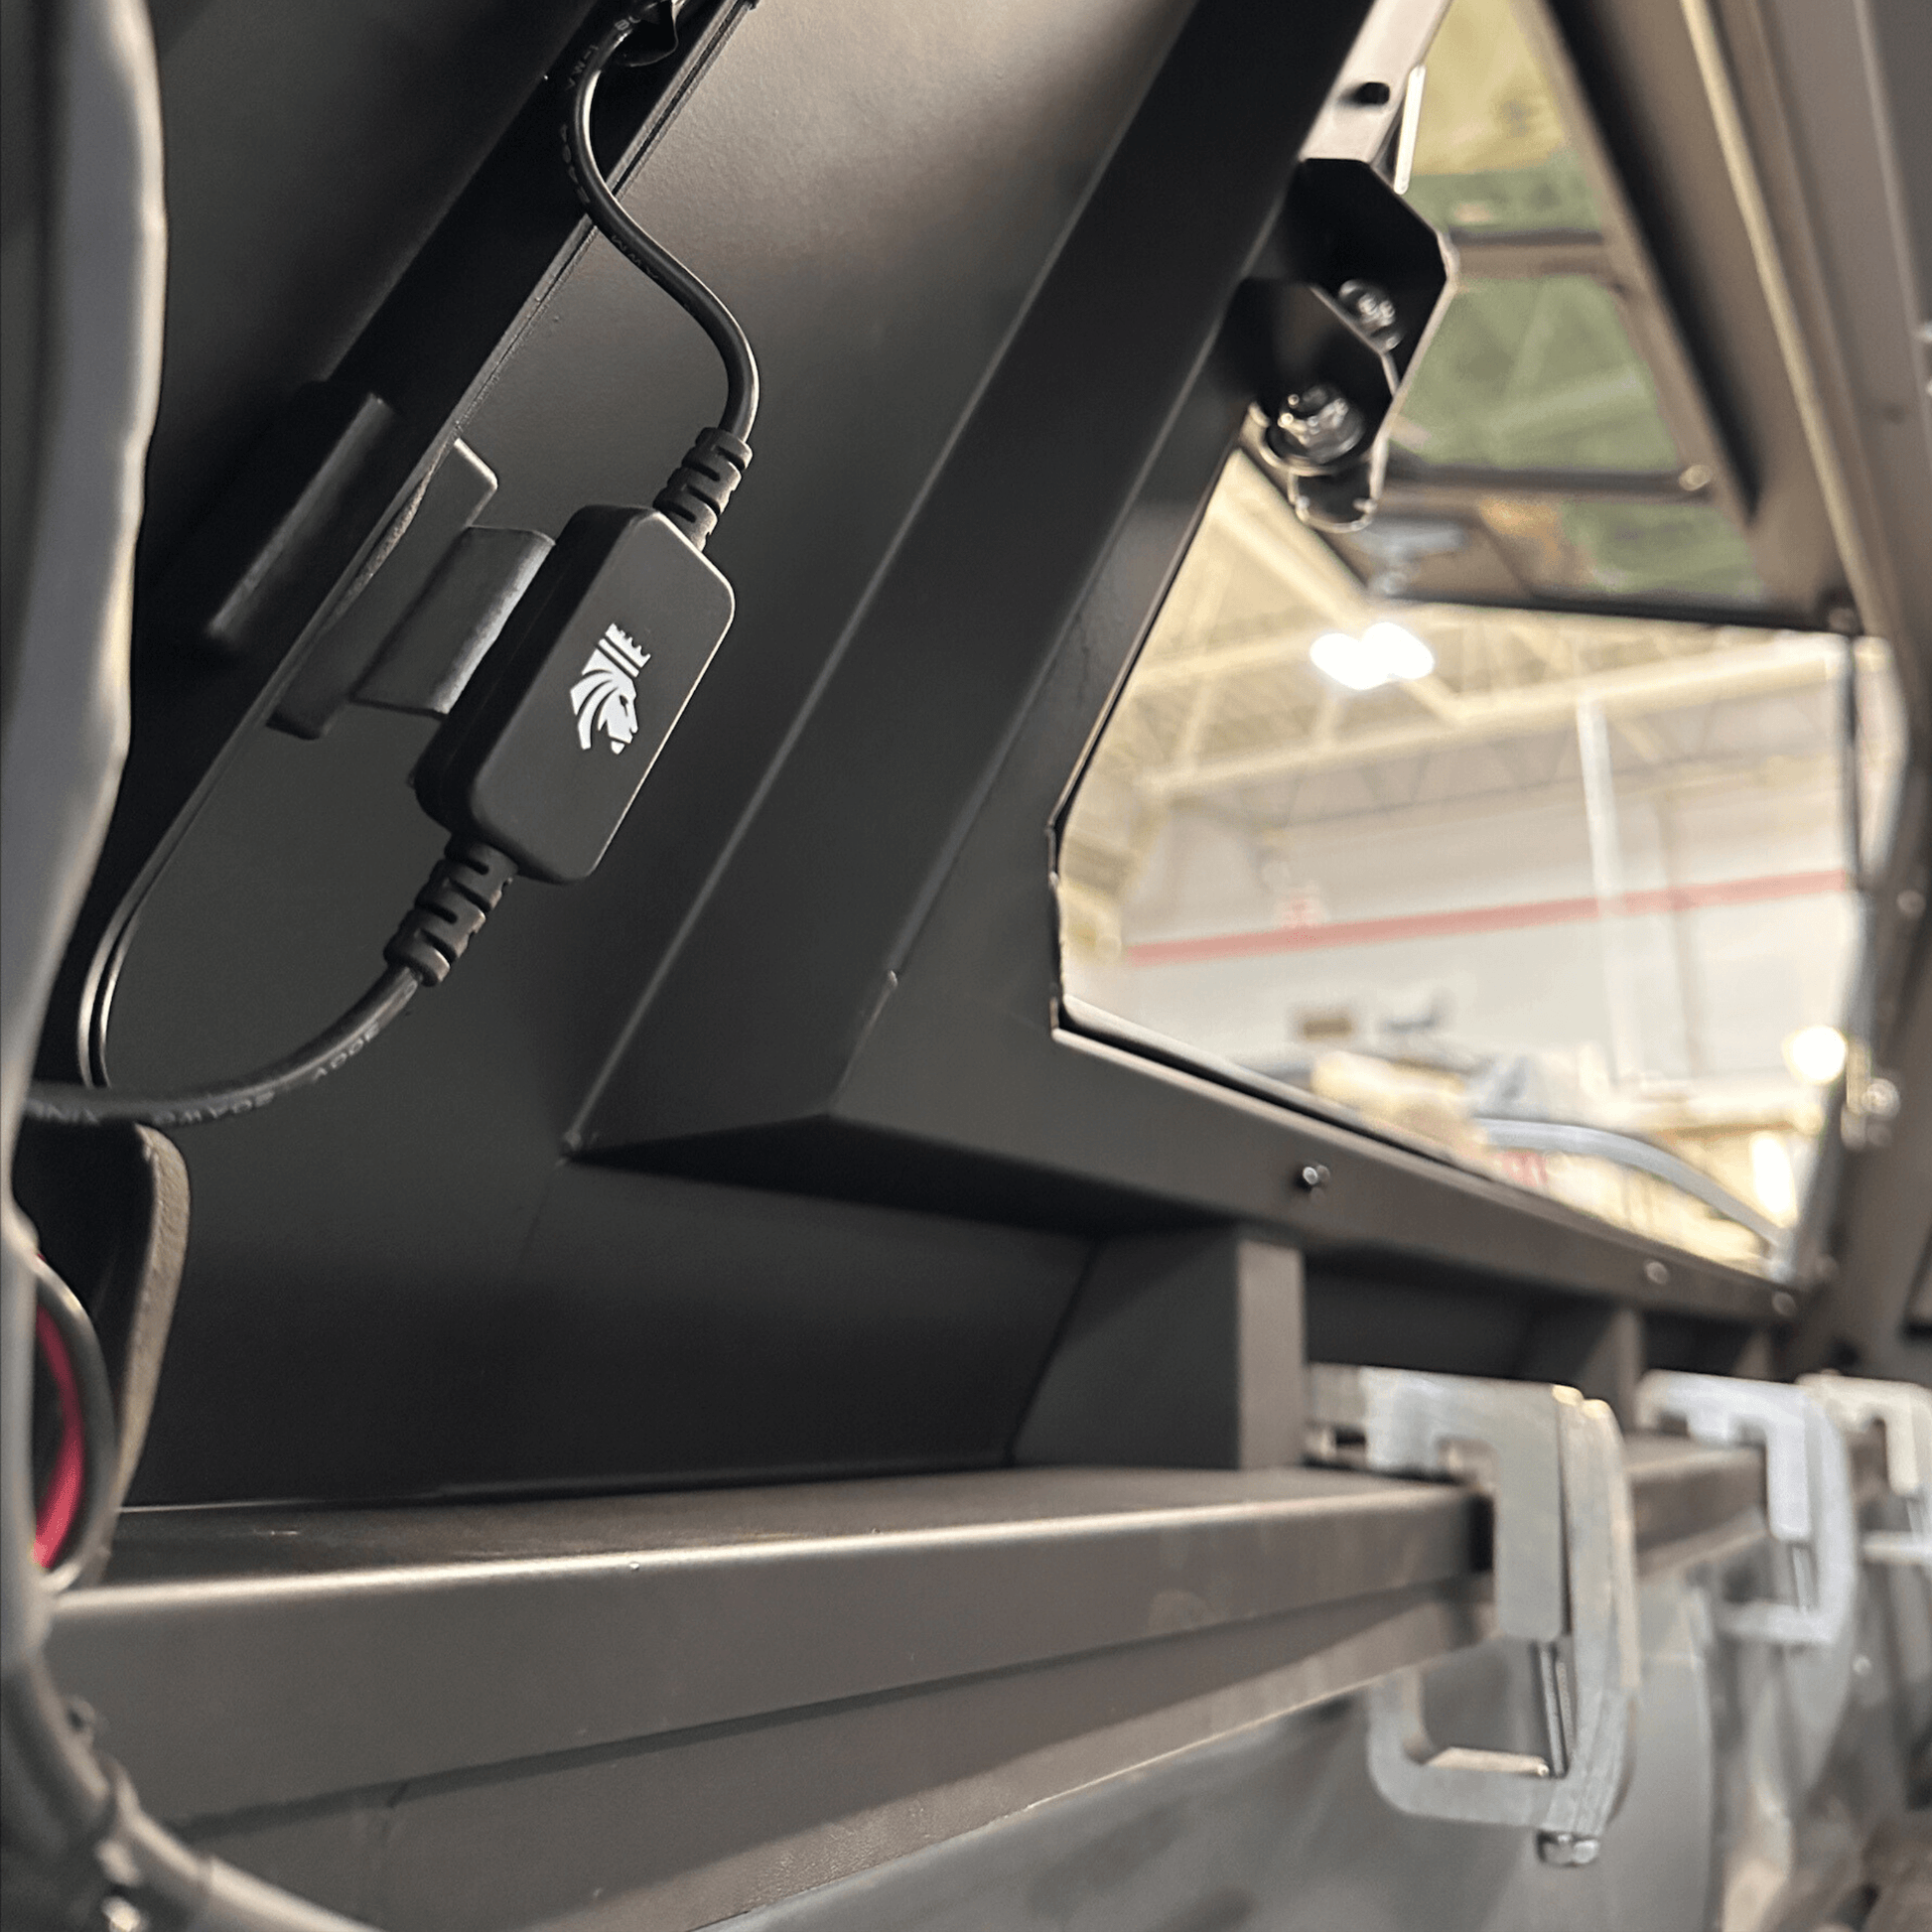 Kingpin LED dimmer switch for 12-volt overland trucks and universal light applications installed on a RSI Smartcap camper shell.